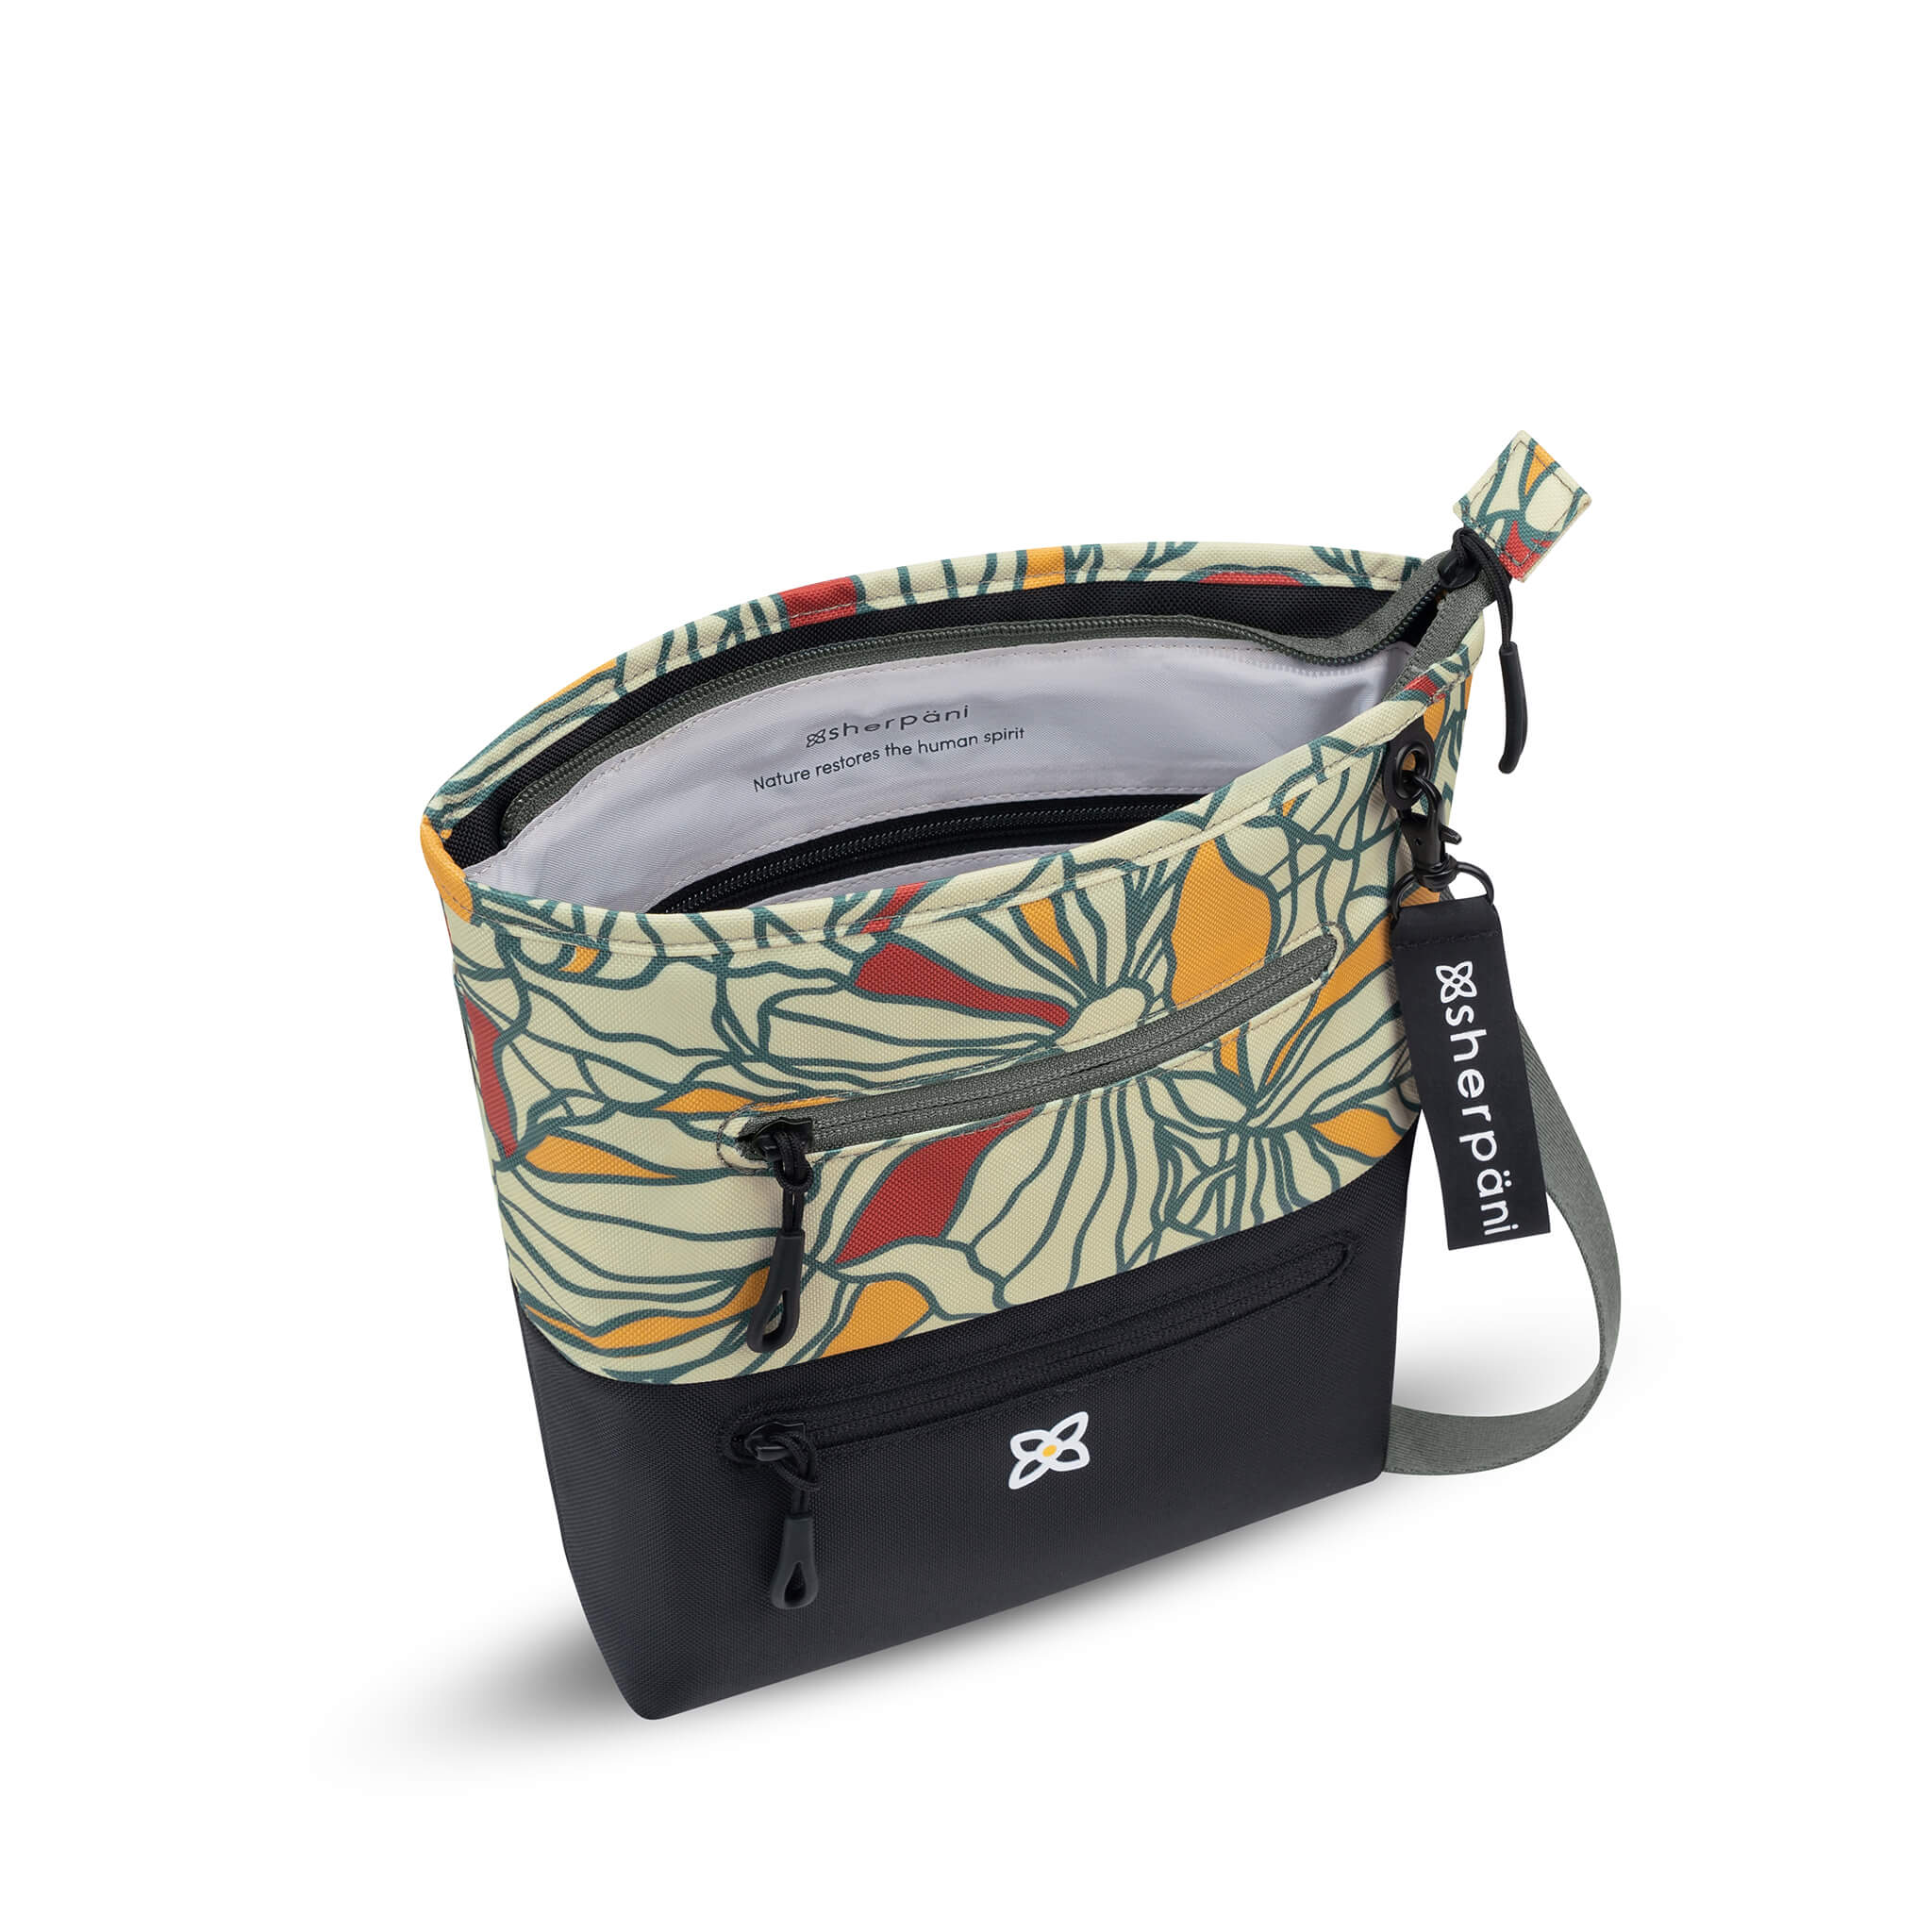 Inside view of Sherpani small crossbody bag, the Sadie in Fiori. The zipper of the main bag compartment is open to reveal internal pockets and text that says &quot;Sherpani: Nature restores the human spirit.&quot;